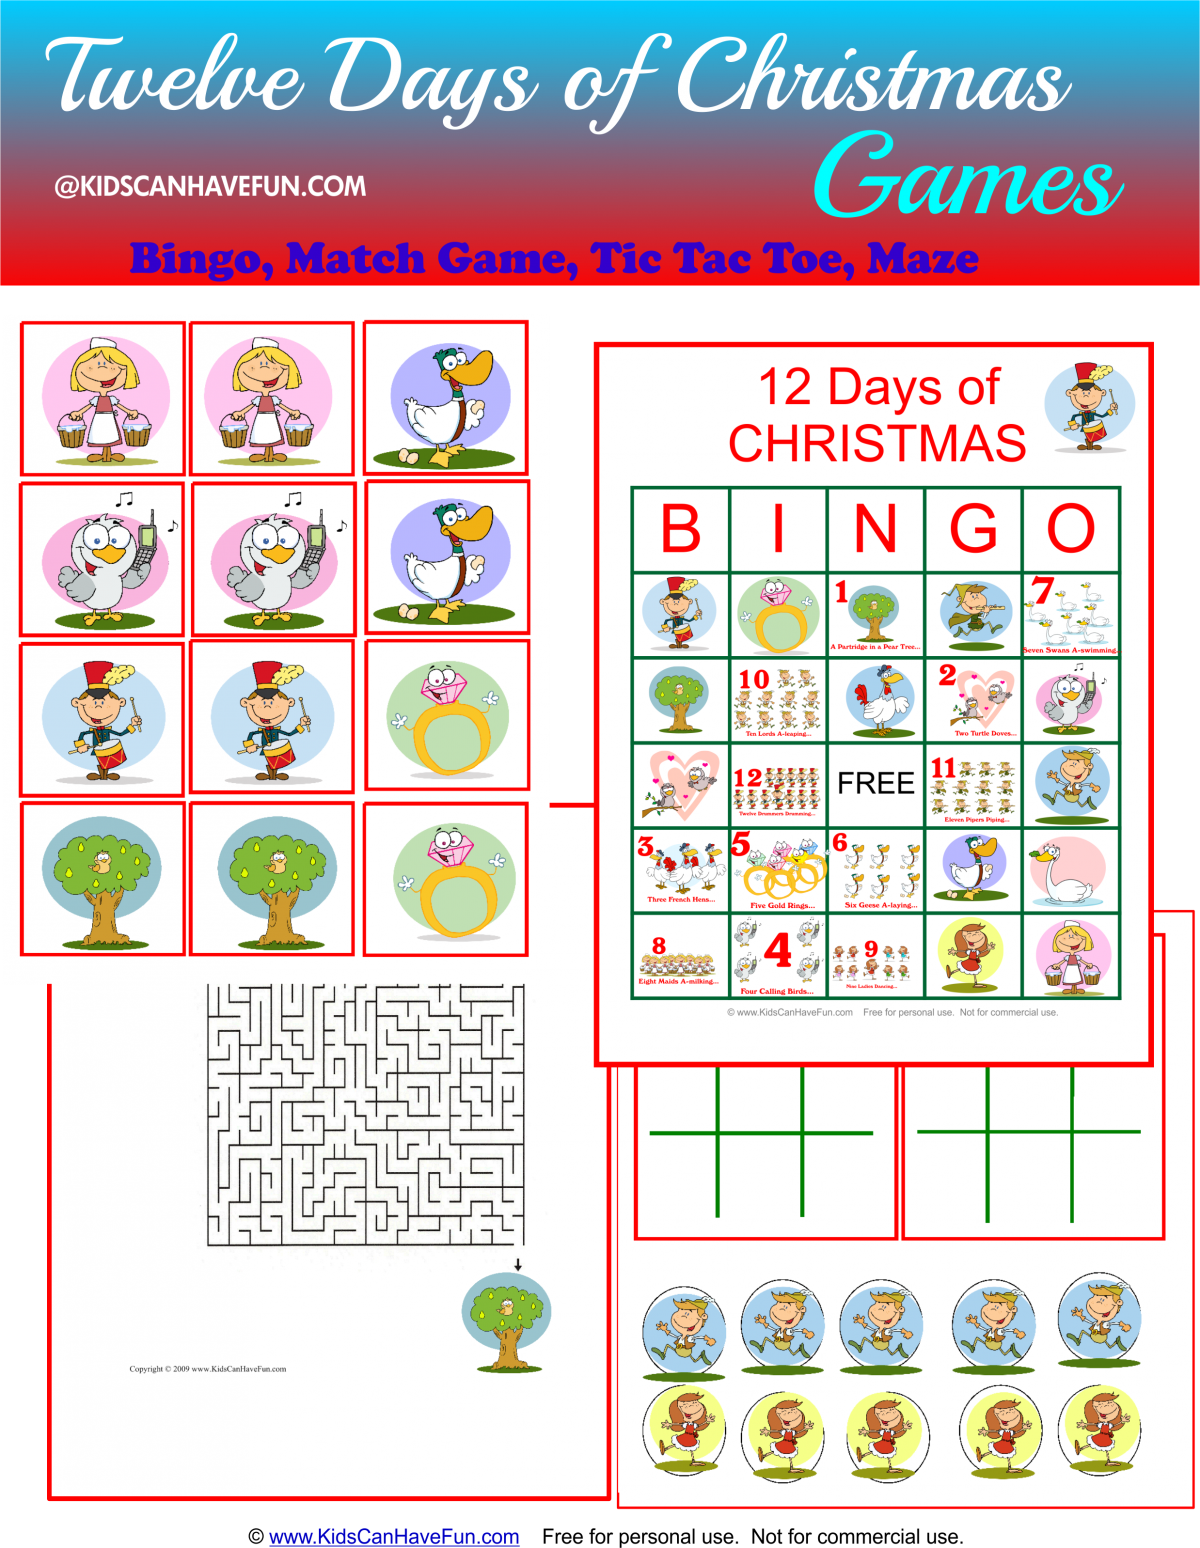 The Twelve Days of Christmas Activities, Sing-along Printables